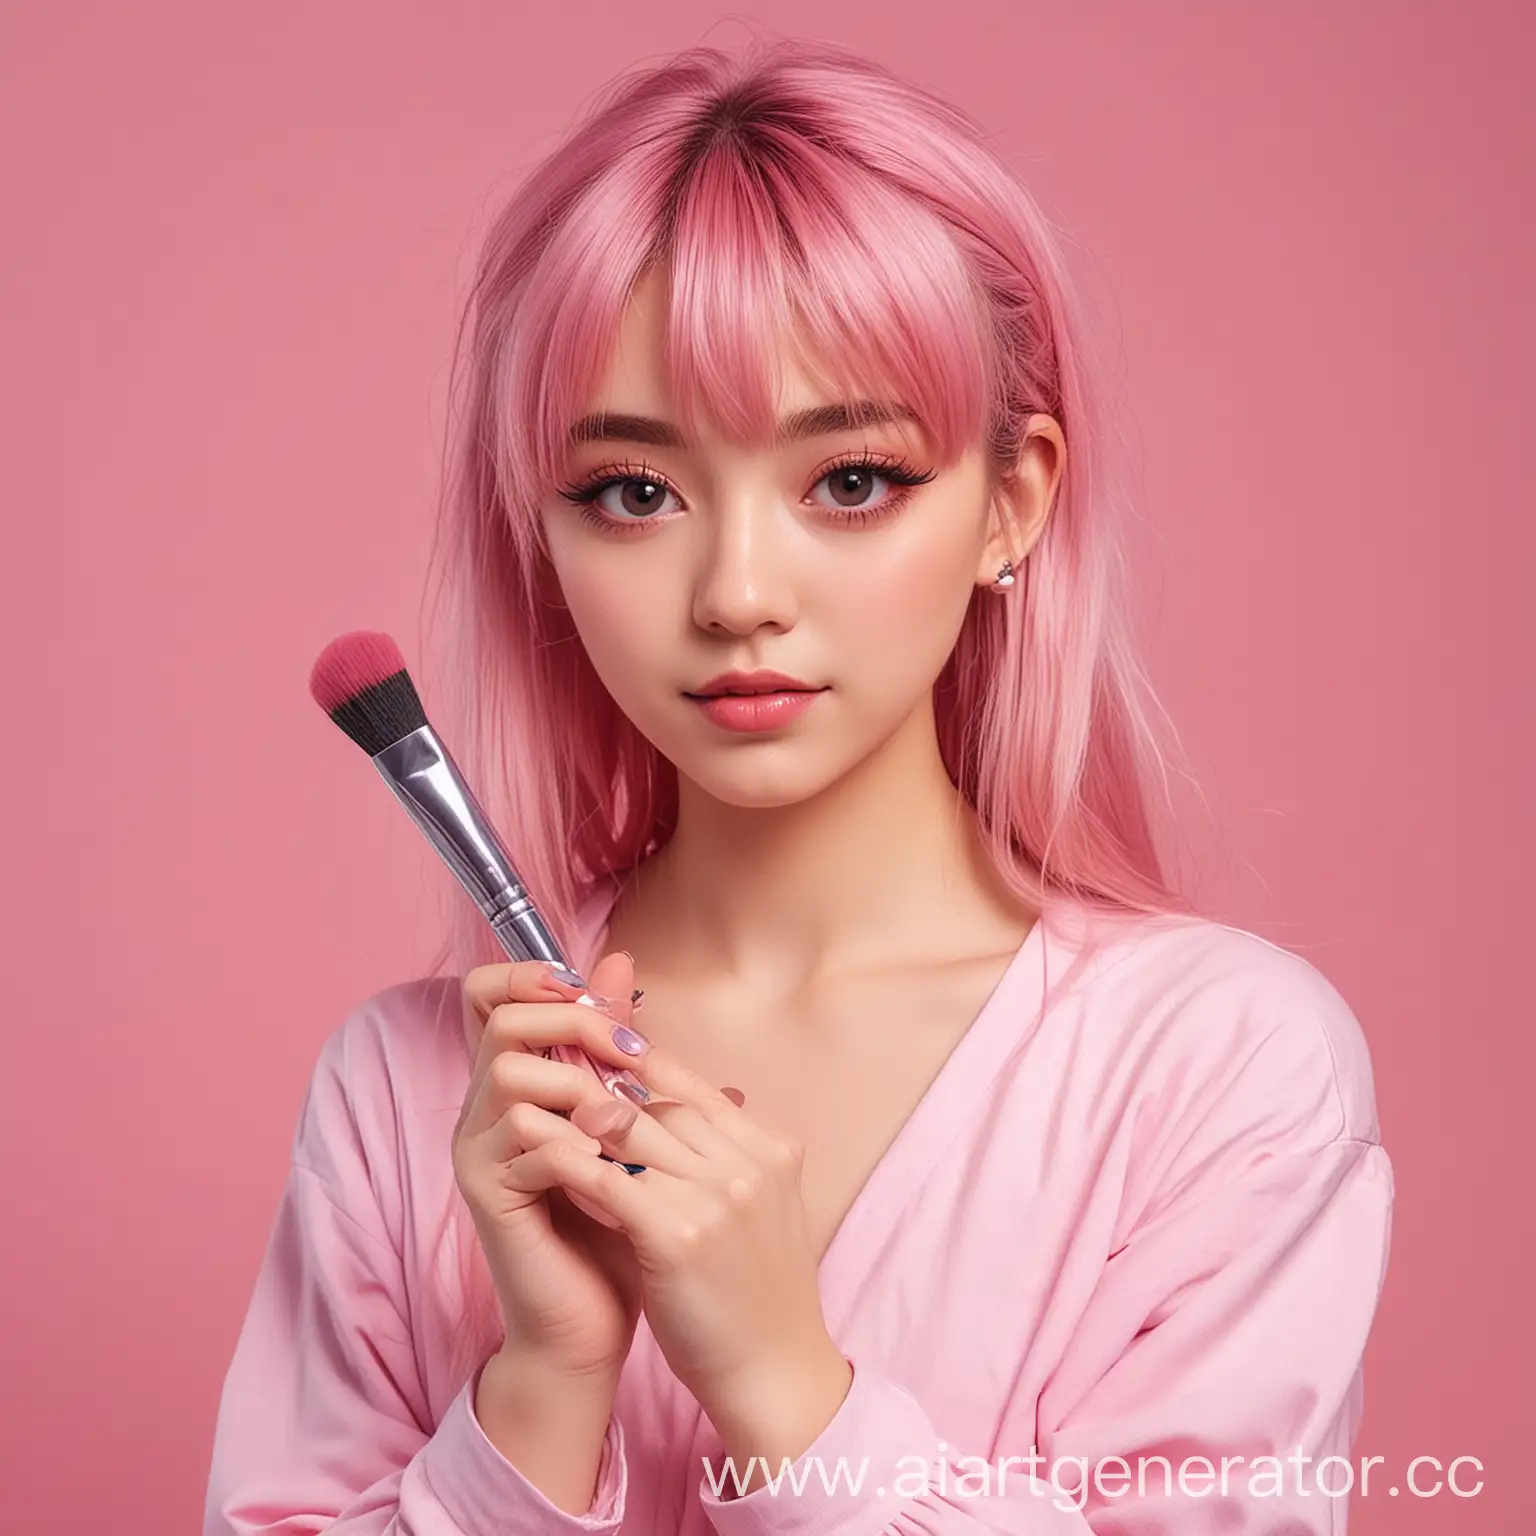 Anime-Girl-Holding-Makeup-Brush-with-Pink-Background